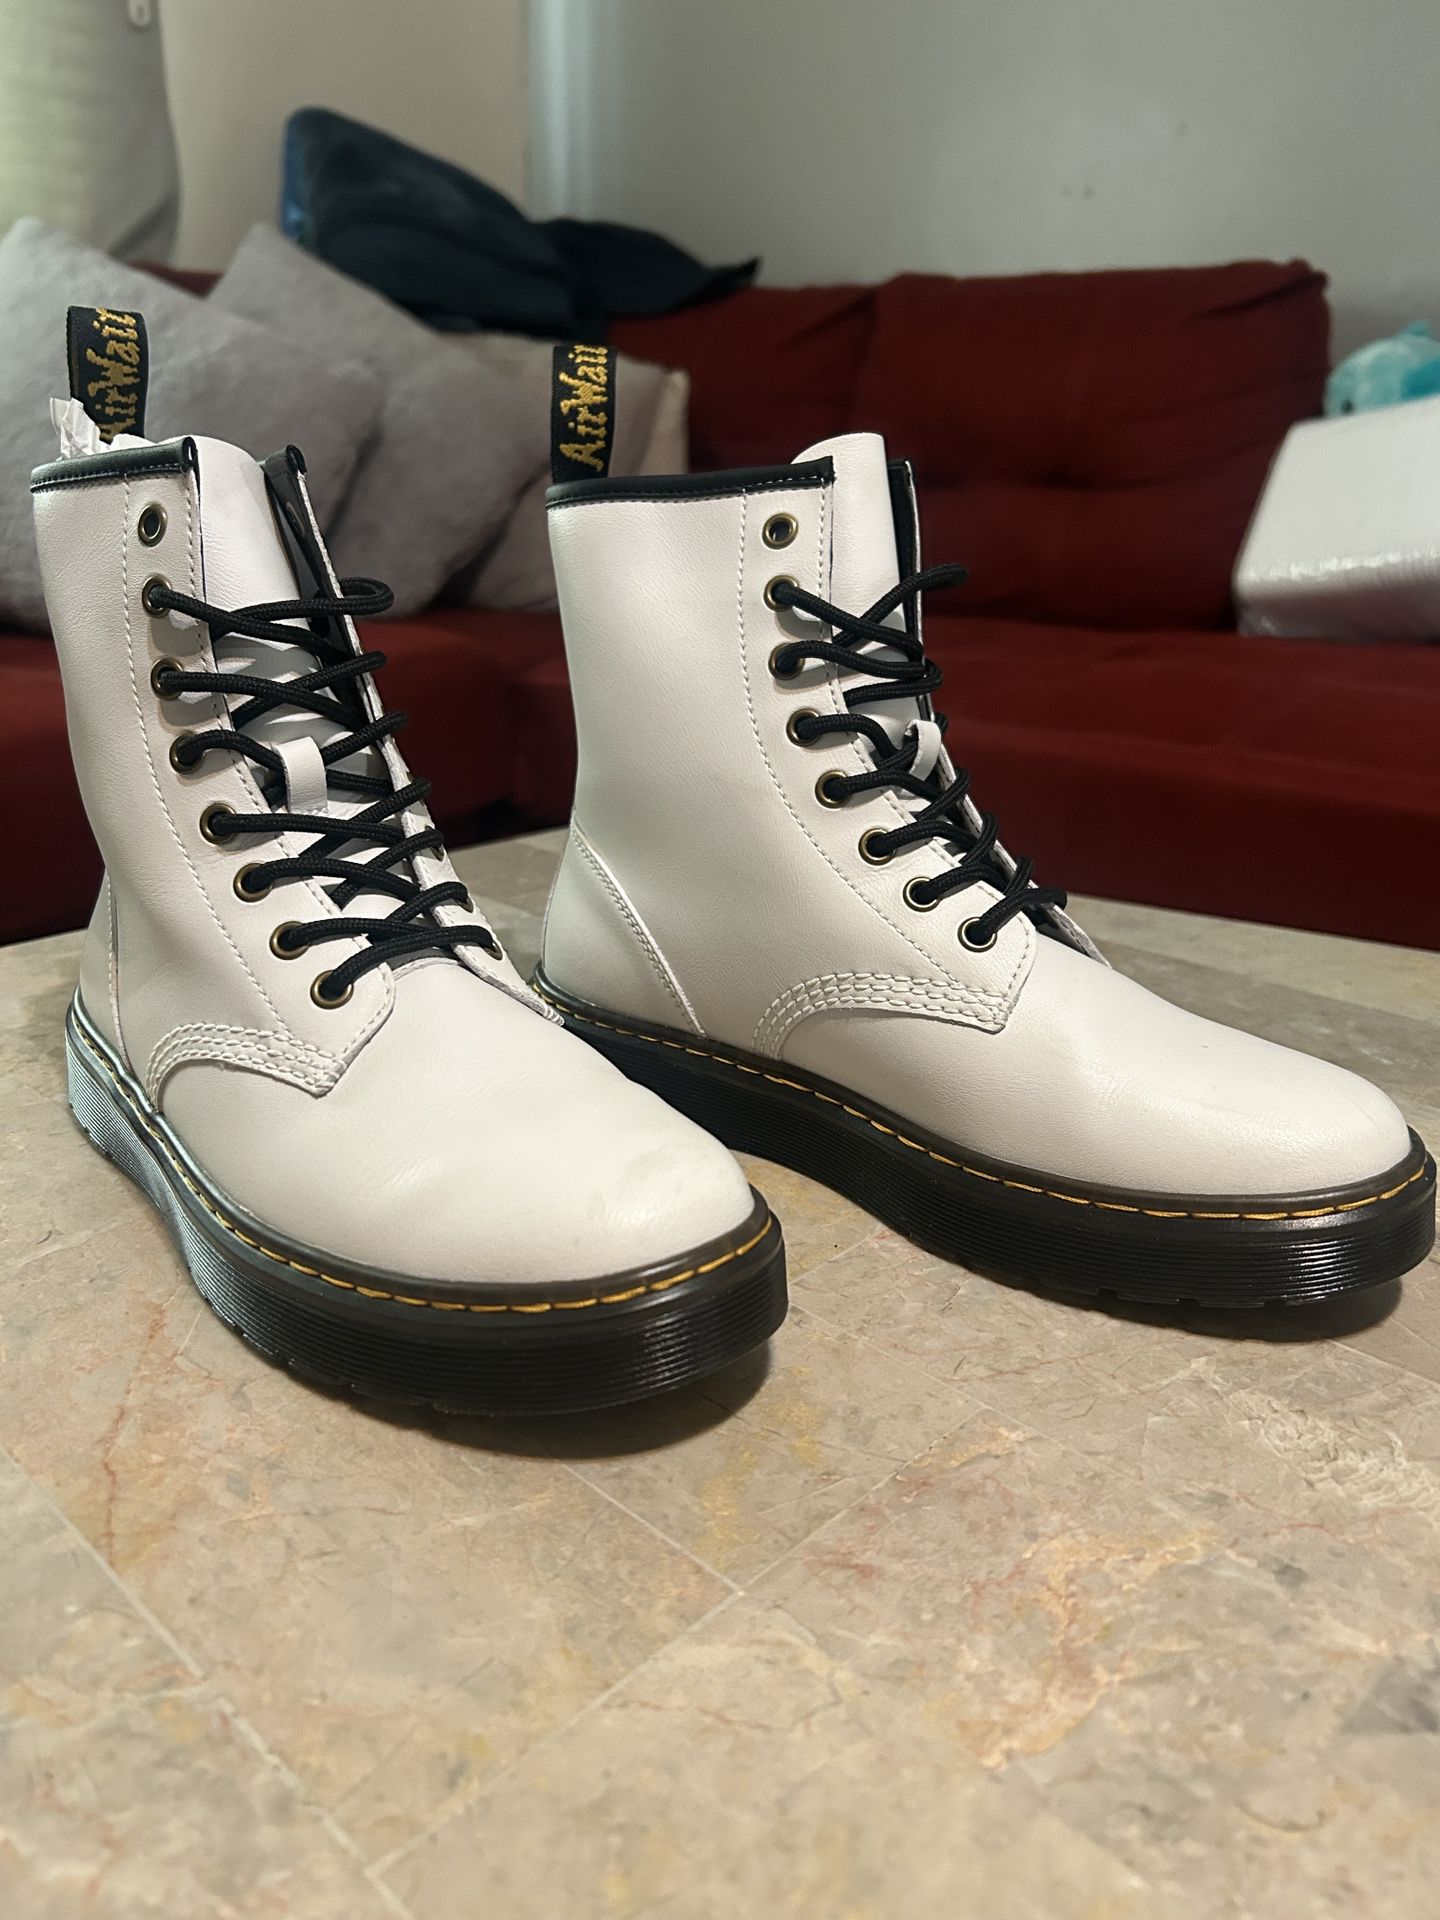 Dr Martens Zavala T Lamper Combat Boots Patent Leather White in Size 8